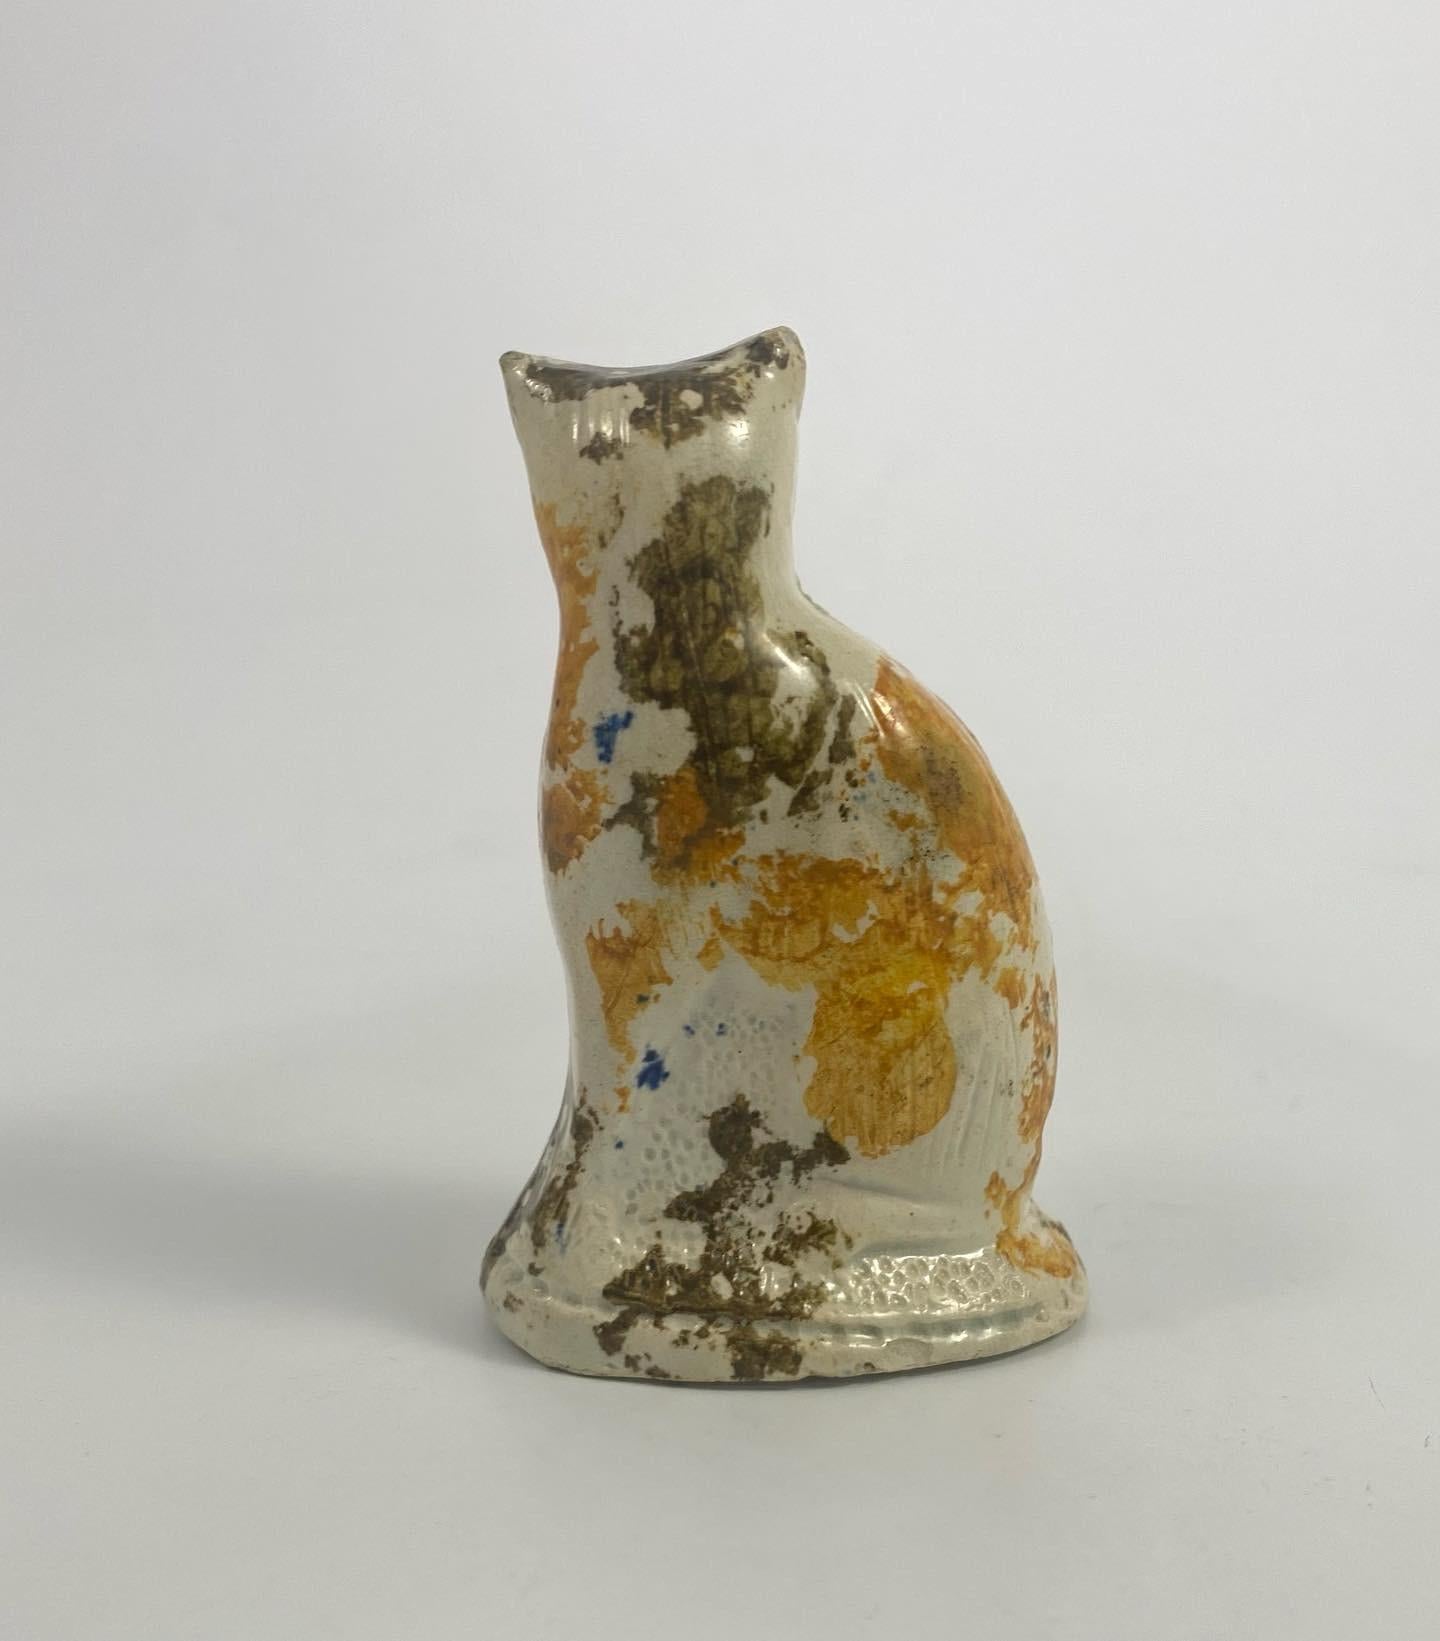 Staffordshire pottery cat, c.1800. The seated cat, with his tail curled in front, coloured in Pratt type glazed spots. Set upon an oval mound base.
Height: 7.5 cm, 3”
Width: 5 cm, 2”.
Depth: 3.5 cm, 1 3/8”.
Condition: Excellent. No damage. No